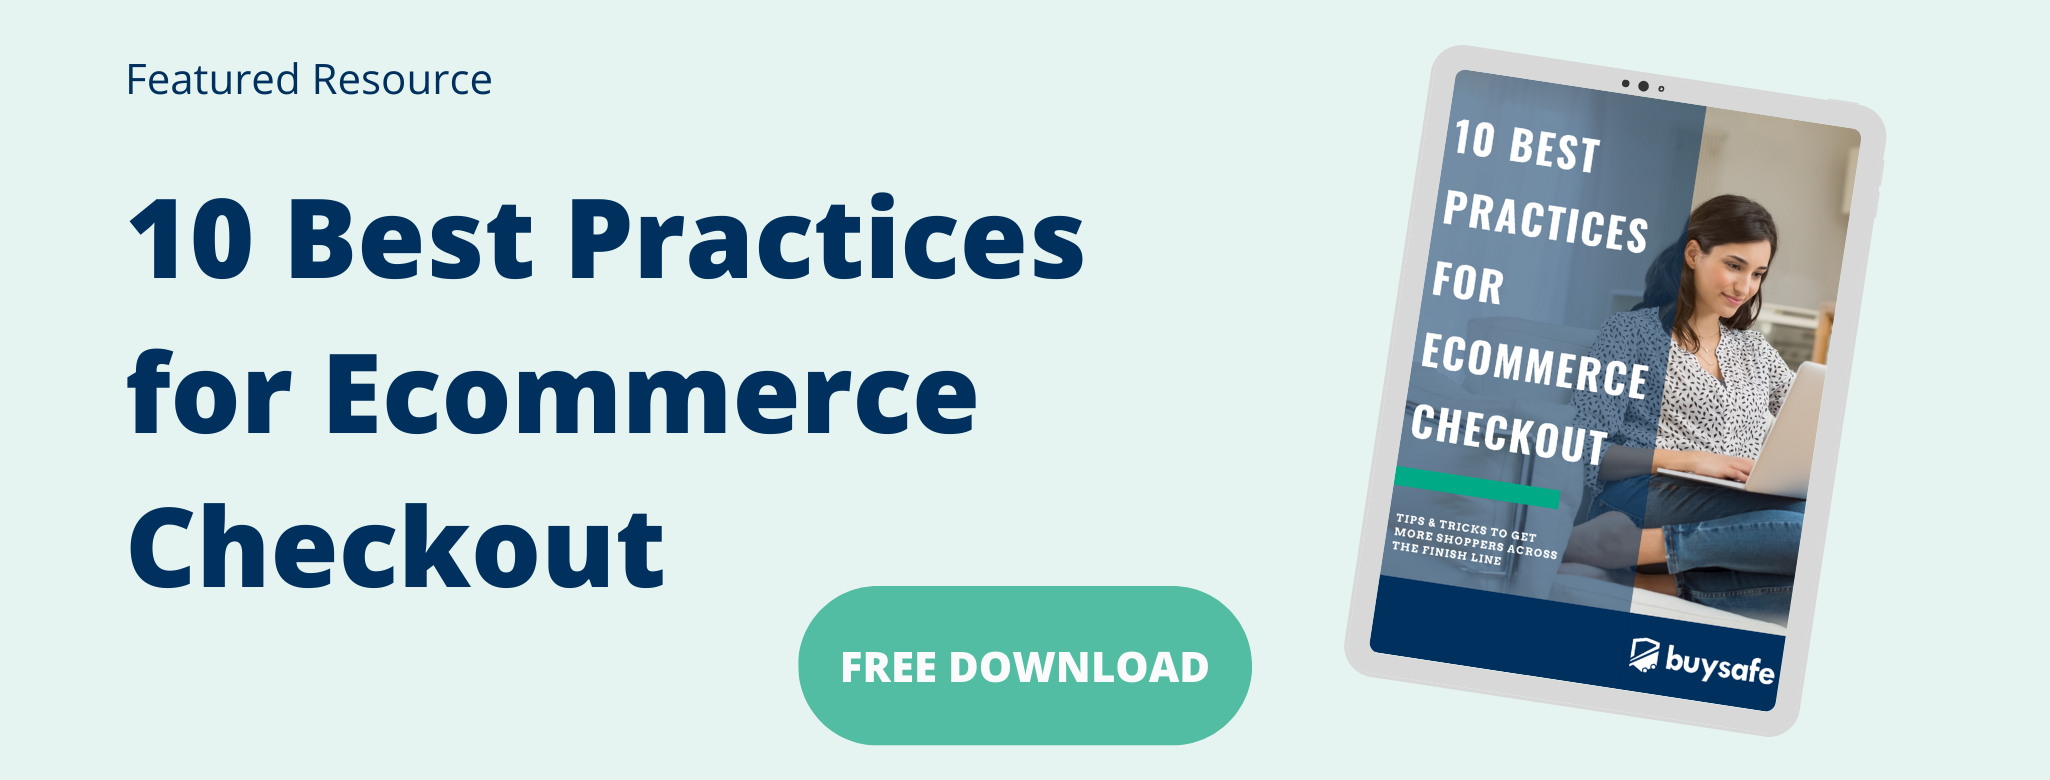 10 Best Practices for Ecommerce Checkout Featured Resource